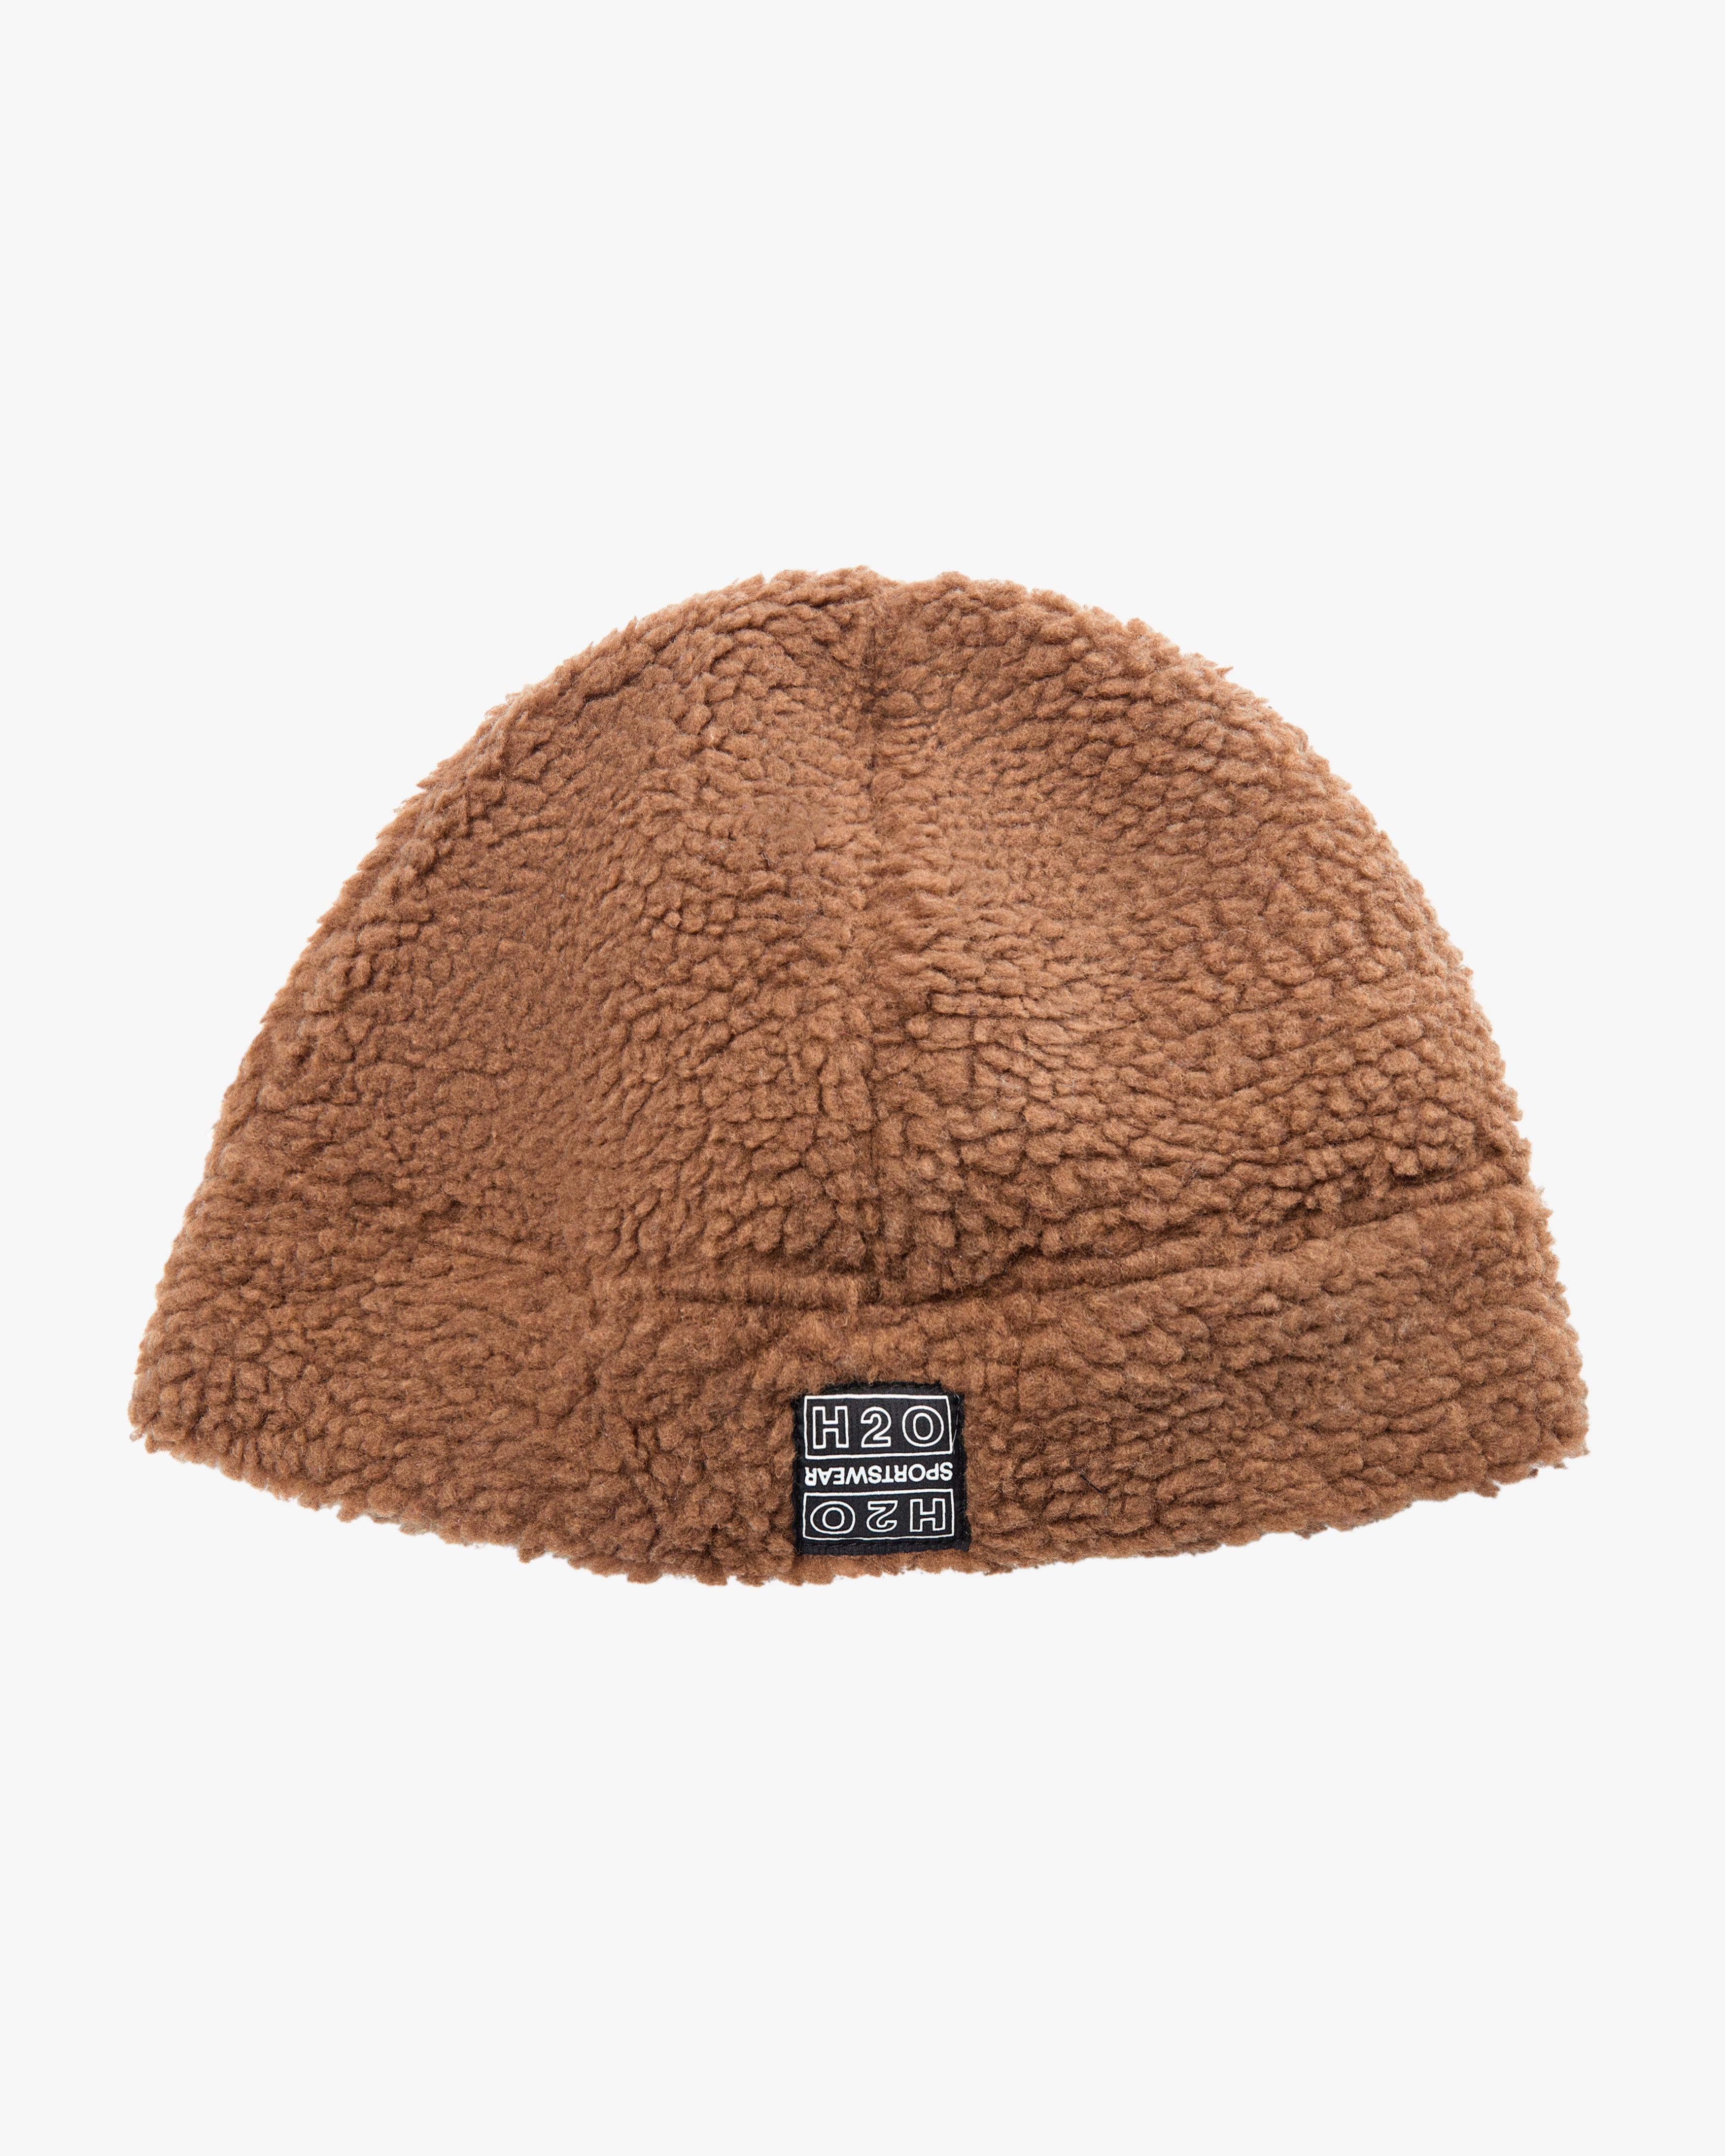 H2O Langli Pile Hat Accessories 3560 Bison Brown